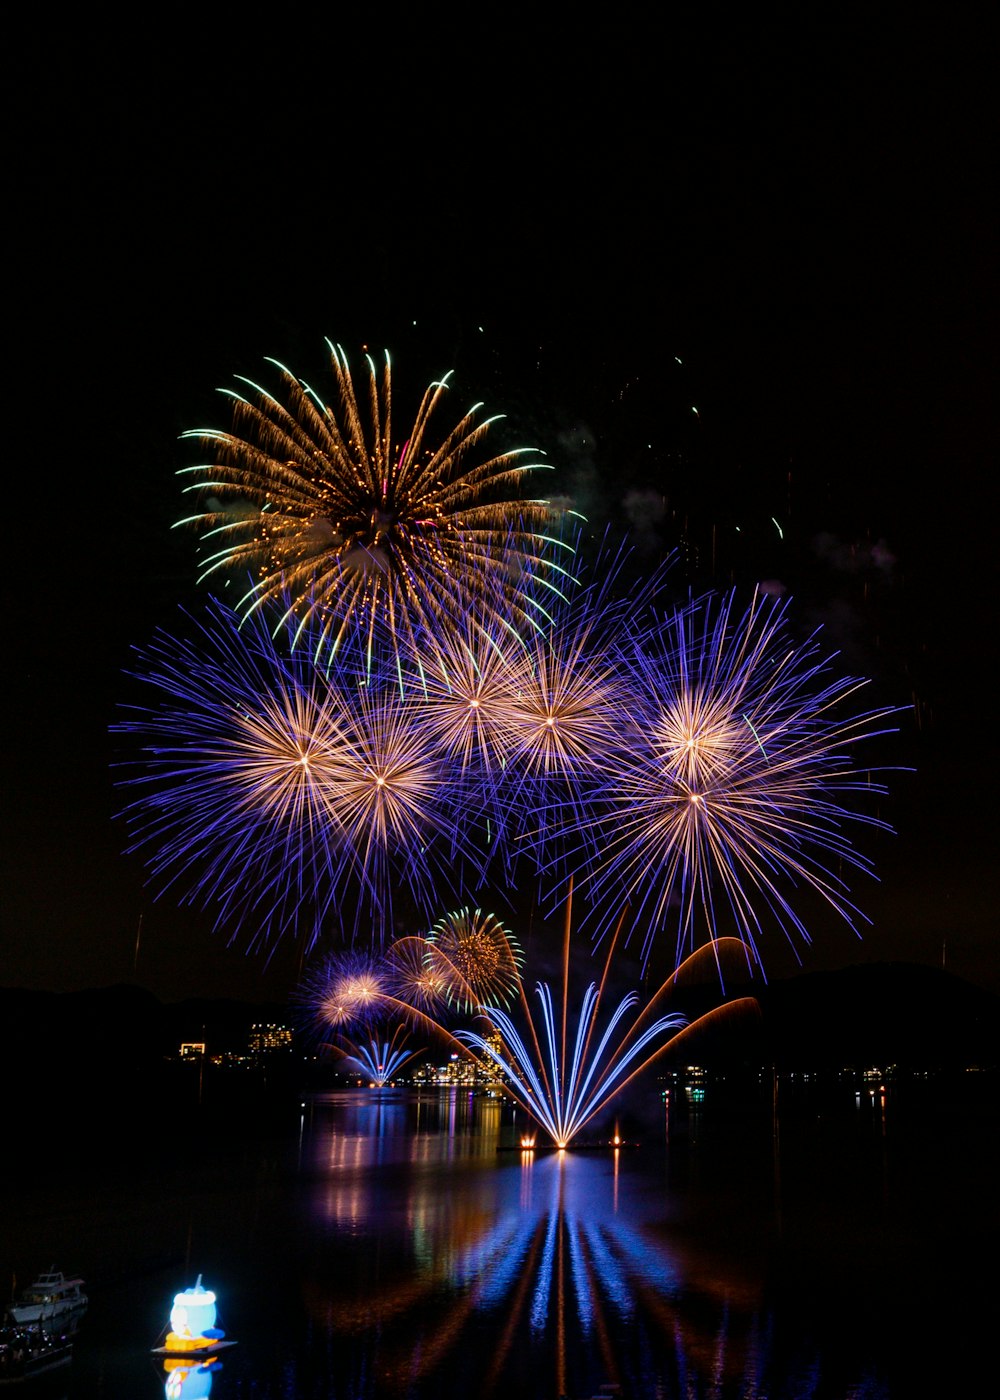 a large group of fireworks are lit up in the night sky